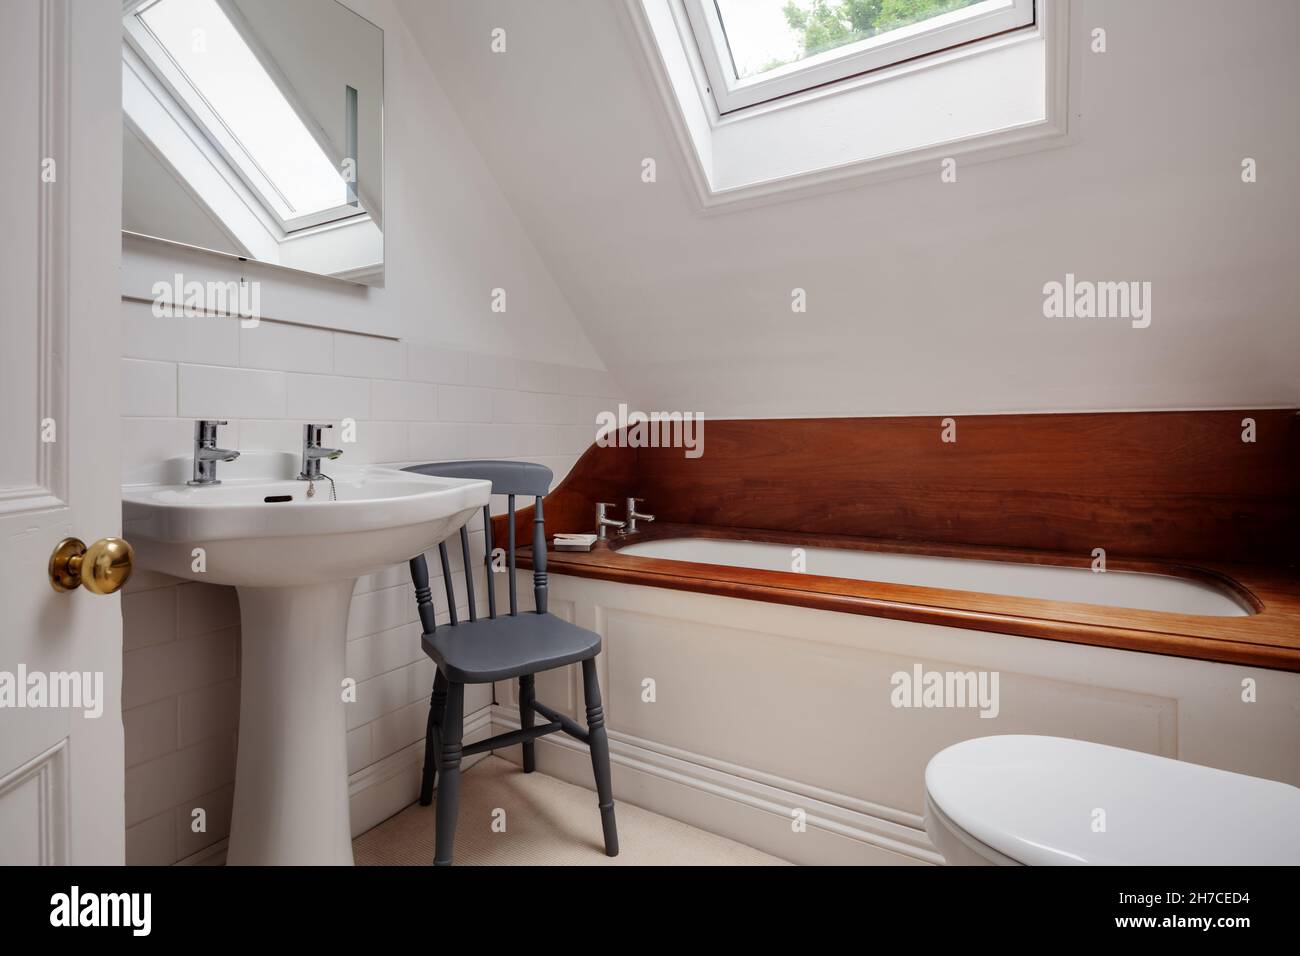 Stradishall, Suffolk, England - 16 June 2020: Traditional compact bathroom with interesting wooden bath surround and splash back Stock Photo